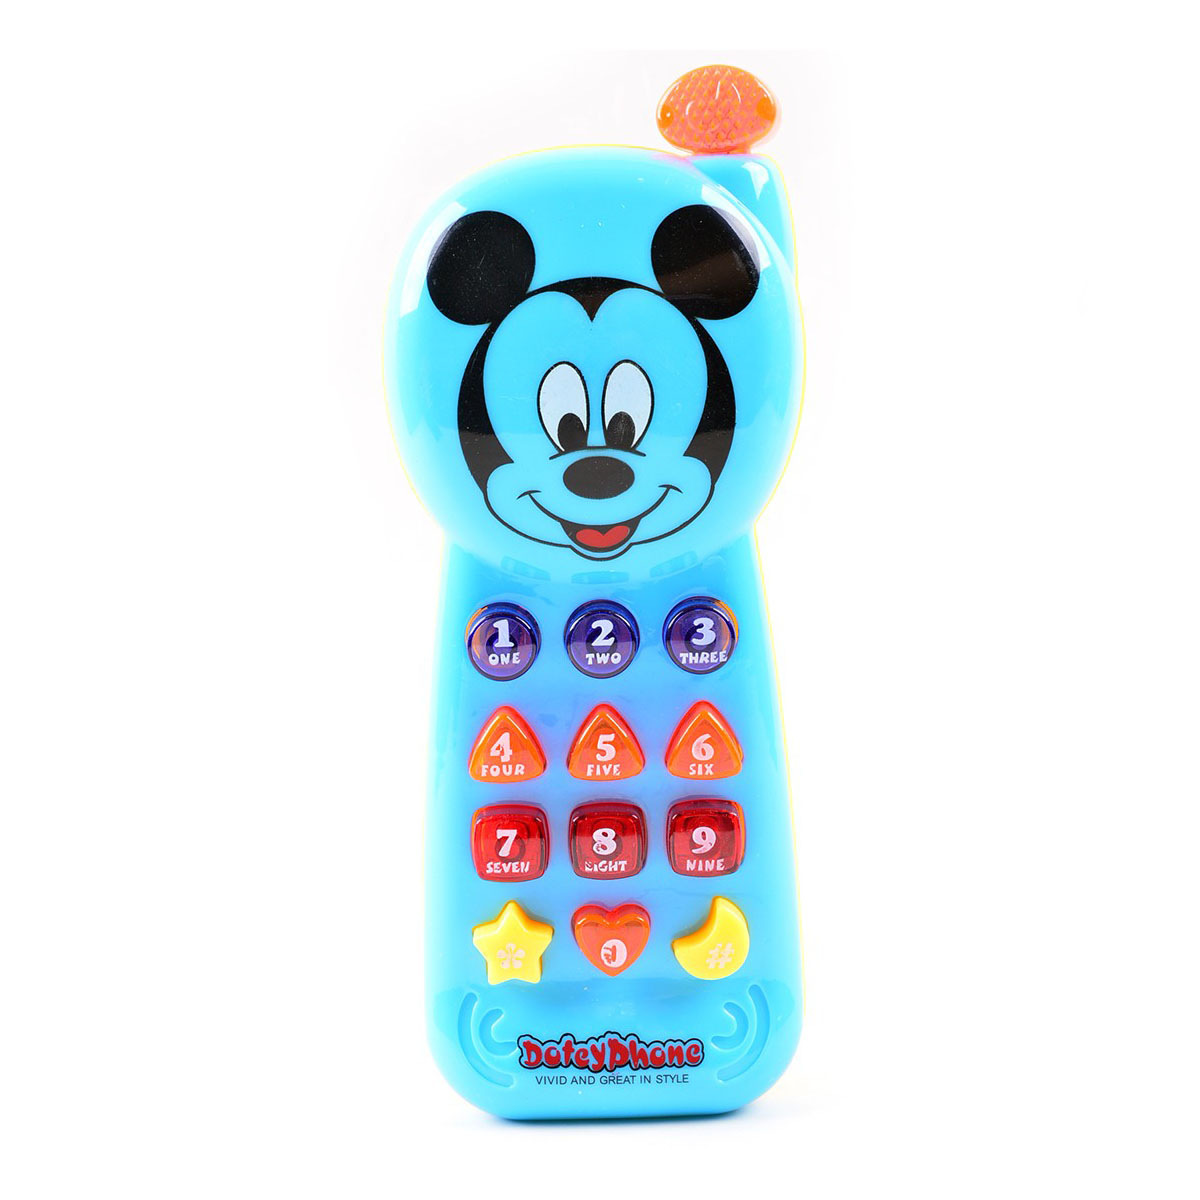 Musical Mickey Mouse Phone with Lights for Kids